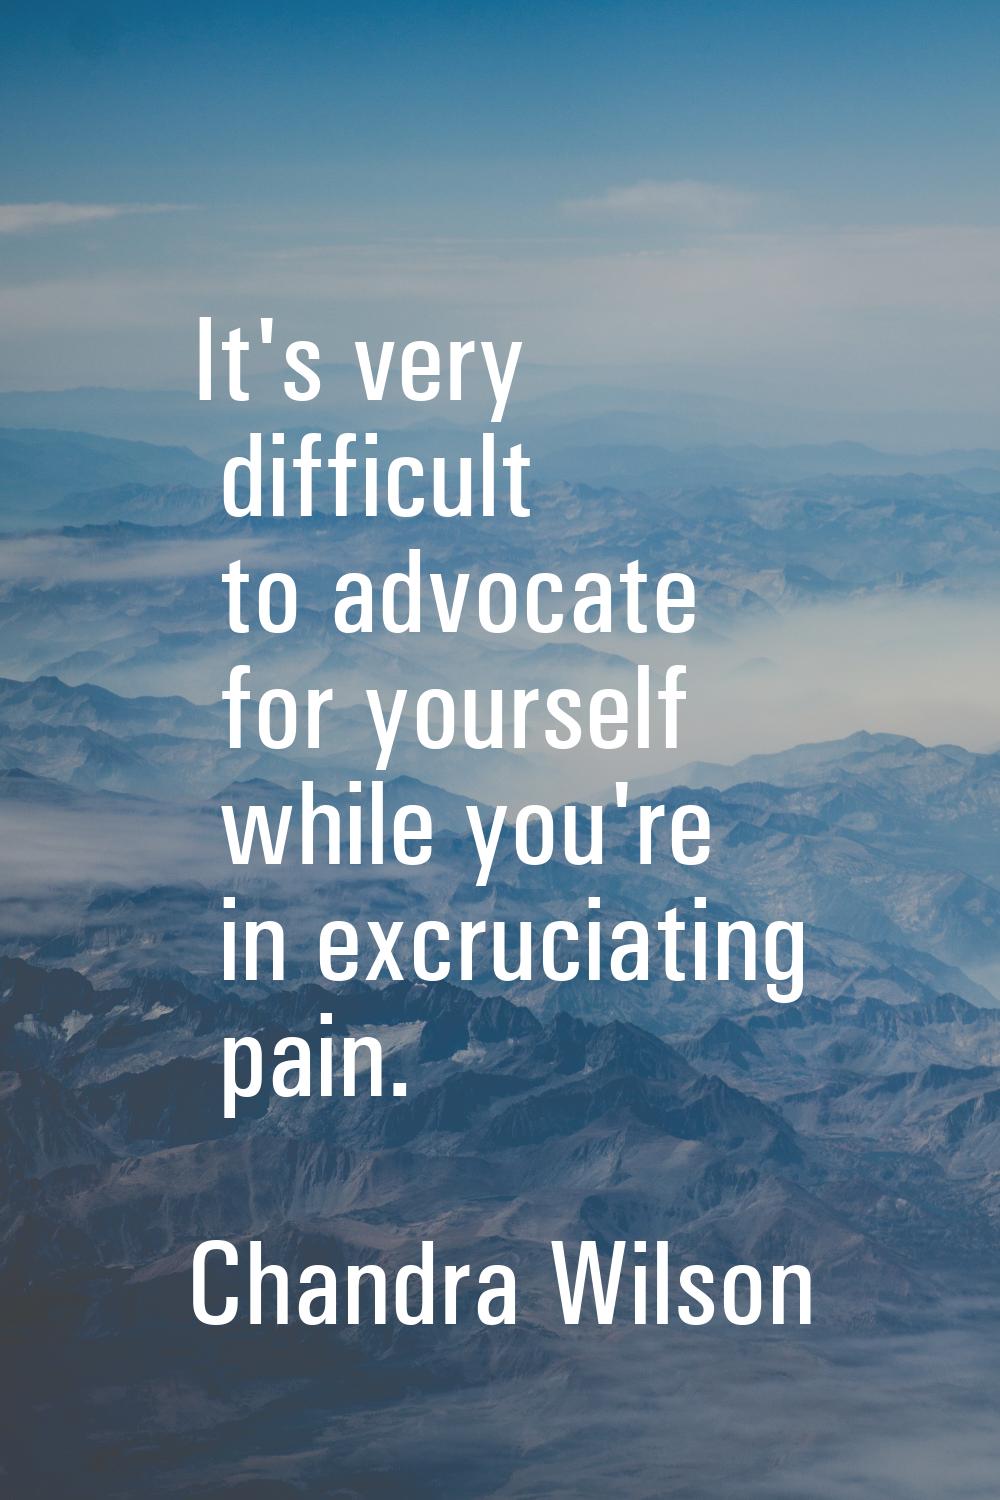 It's very difficult to advocate for yourself while you're in excruciating pain.